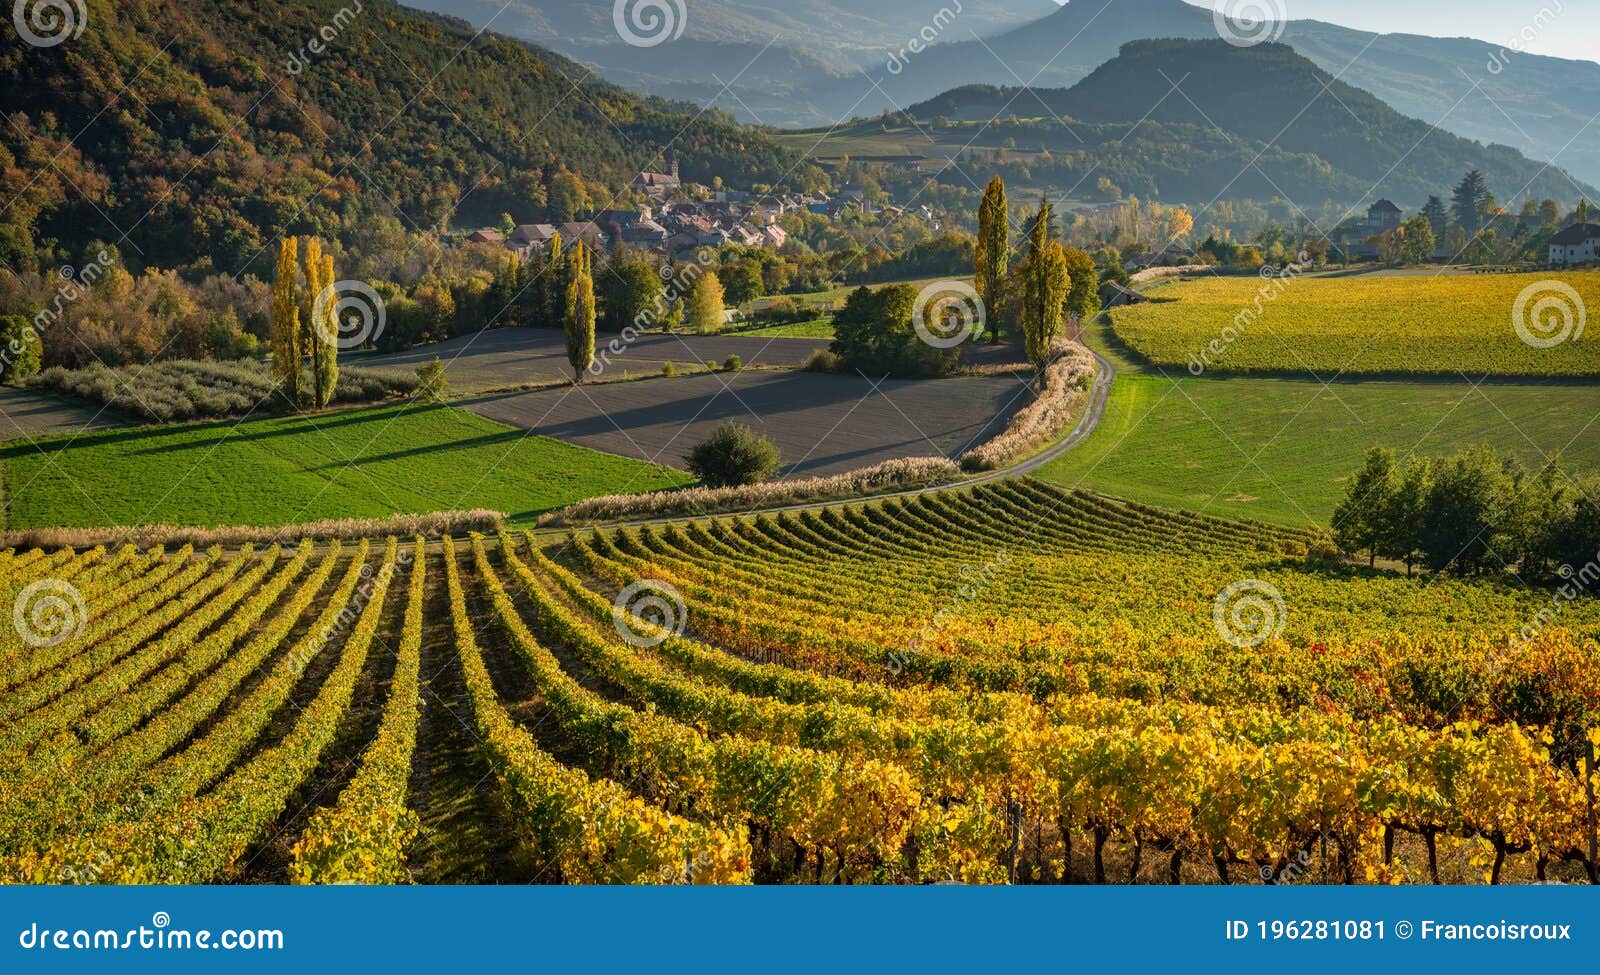 vineyards and the village of valserres in autumn. winery and grape vines in the hautes-alpes